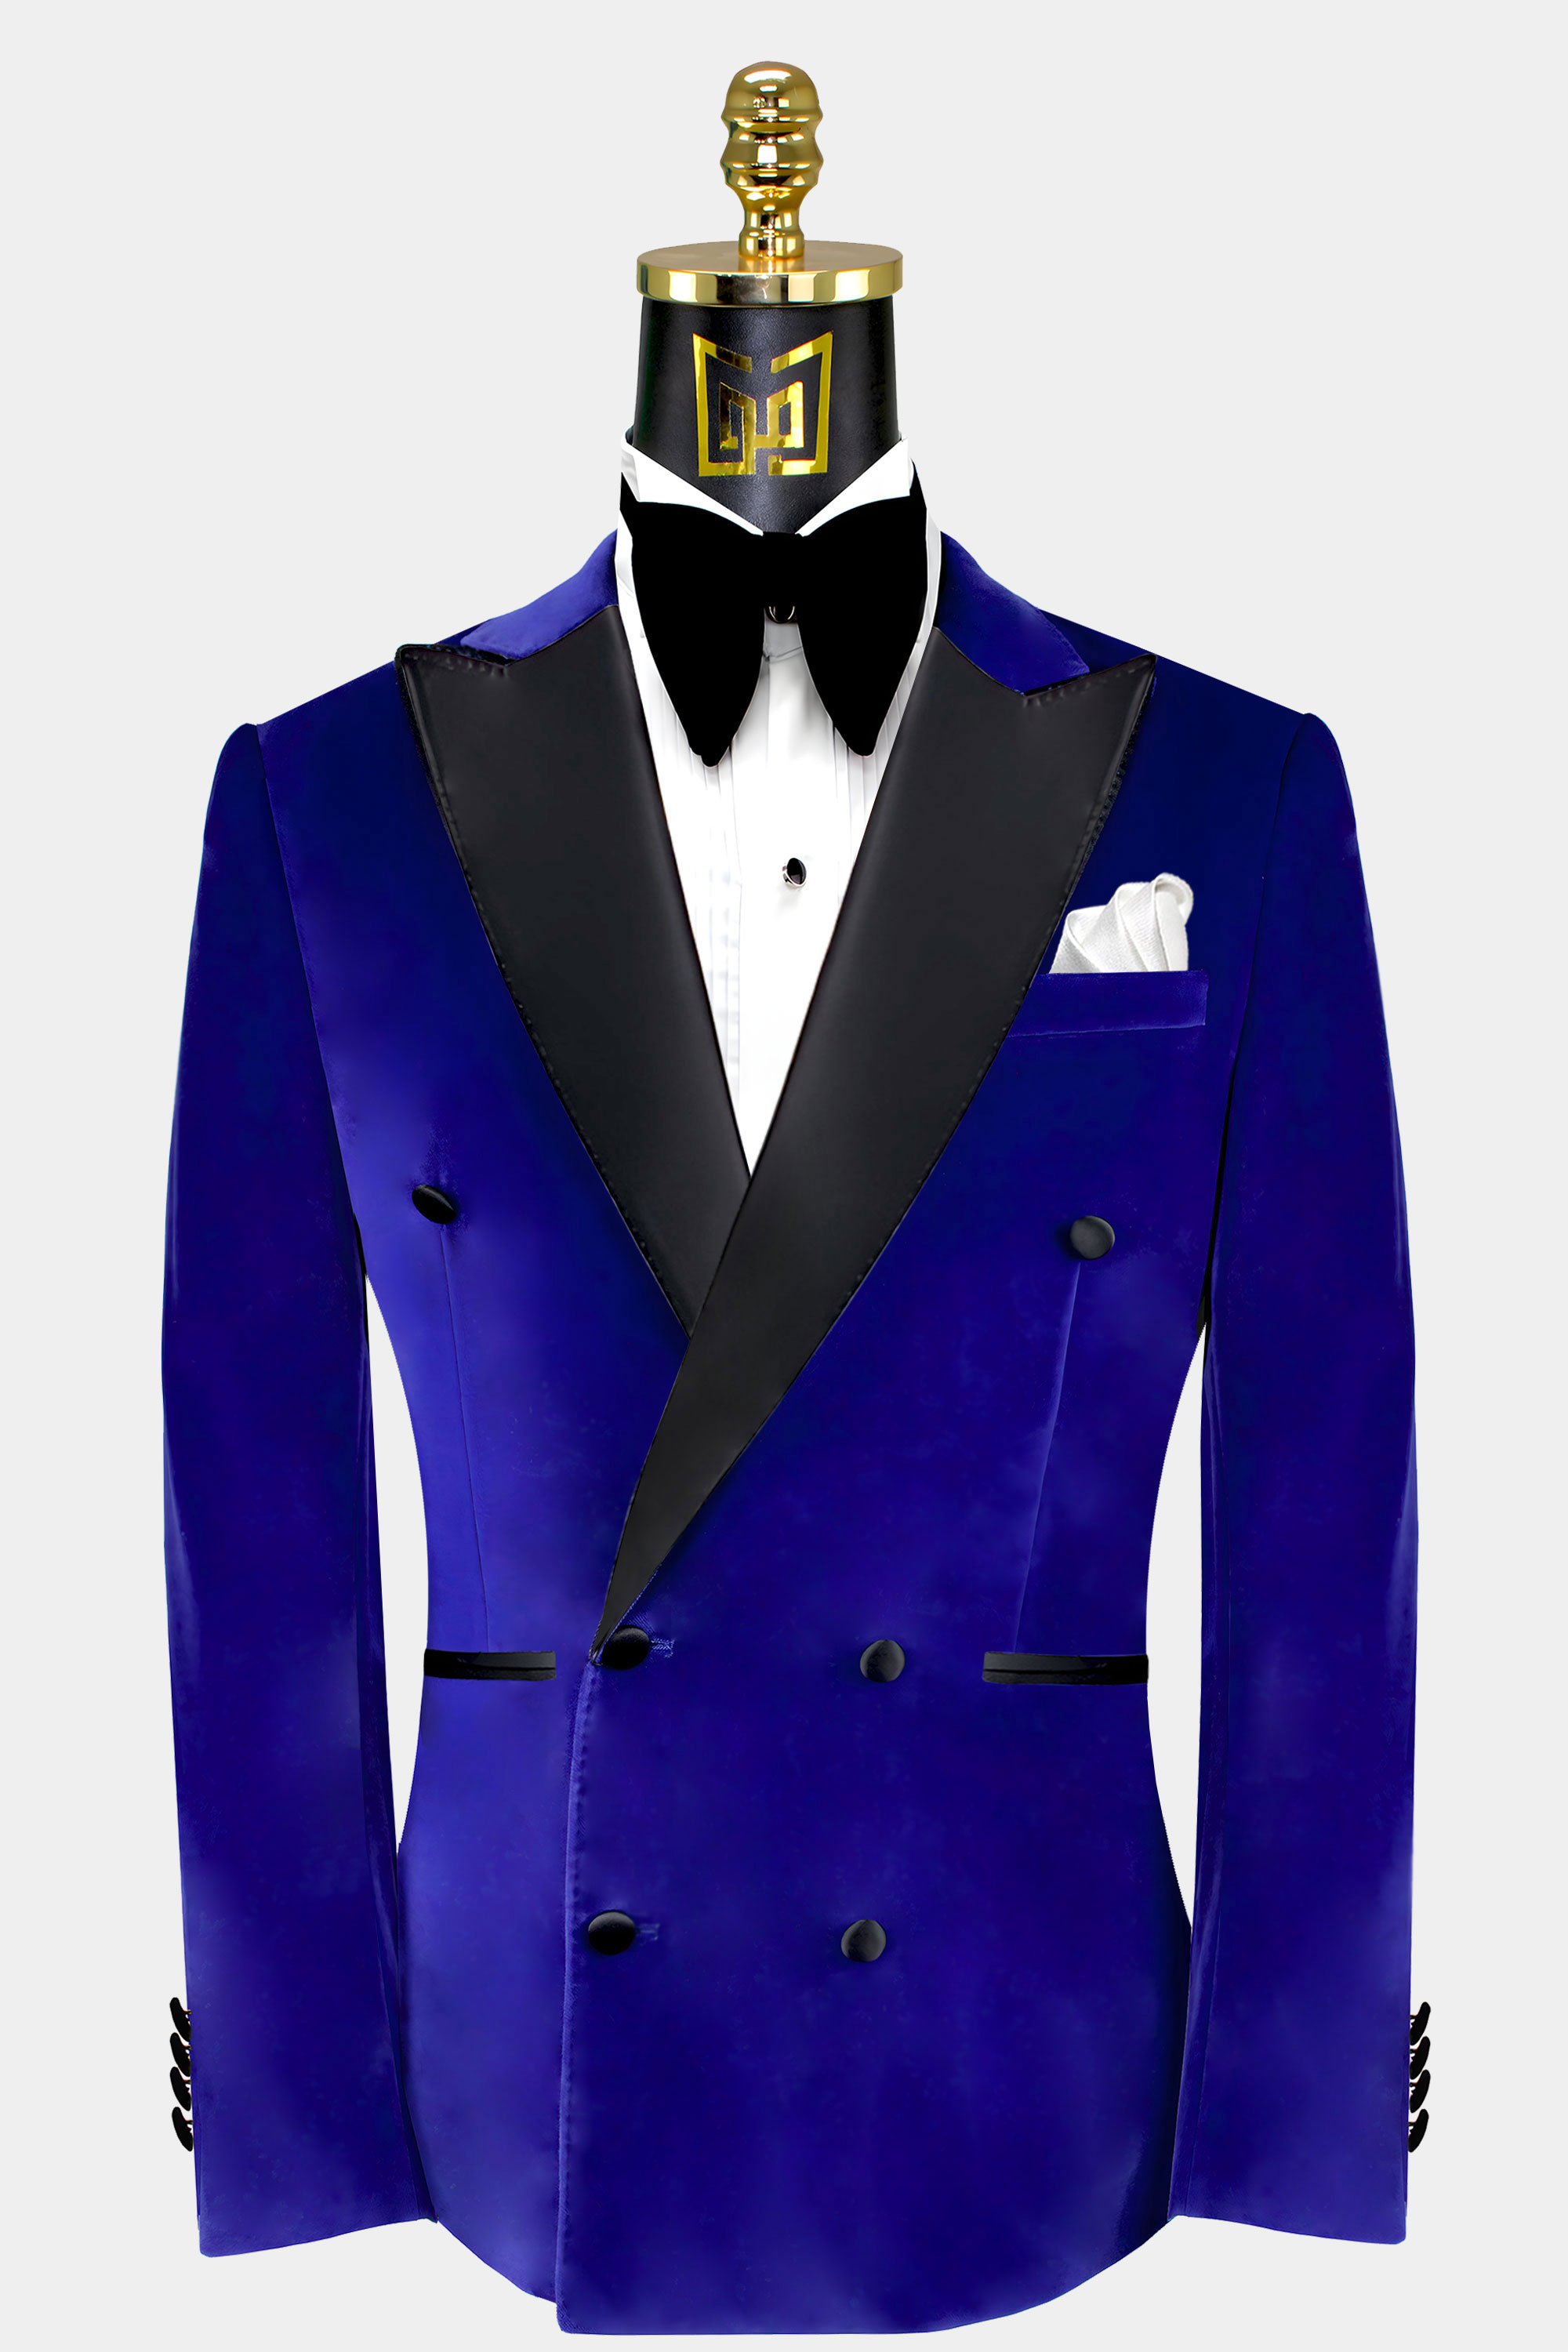 How to Measure Jacket Size for Suits and Tuxedos - SIGNATURE BRIDE